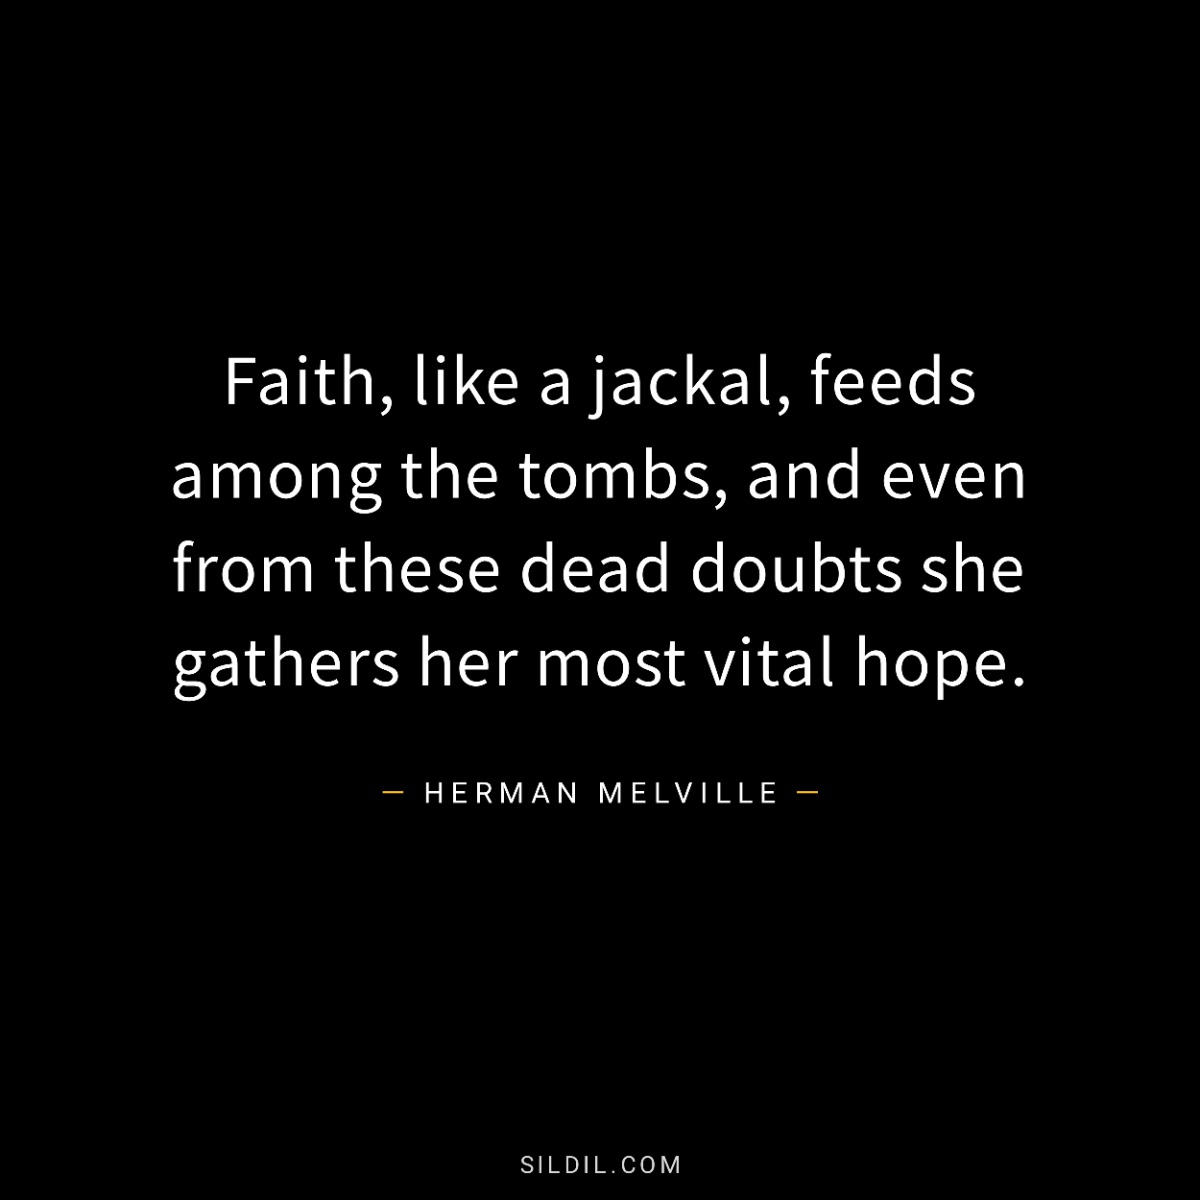 Faith, like a jackal, feeds among the tombs, and even from these dead doubts she gathers her most vital hope.